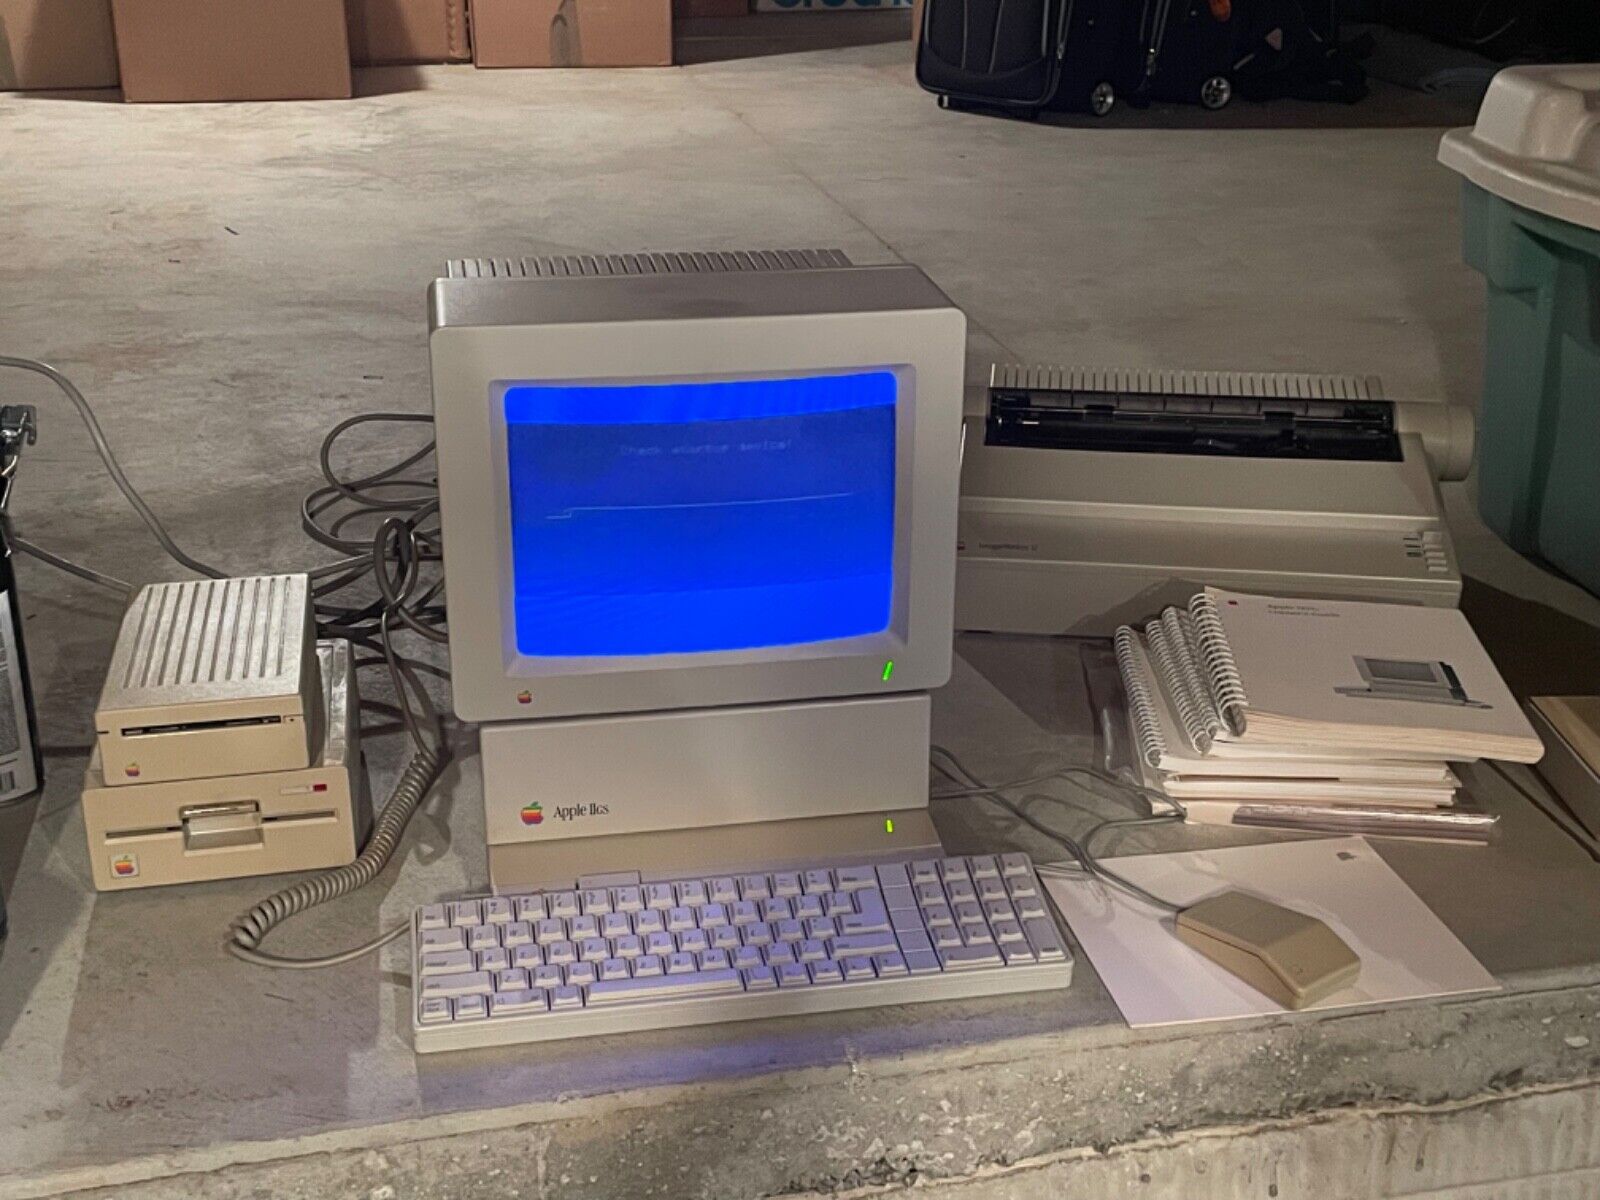 Vintage Apple II GS computer with external discs and printer